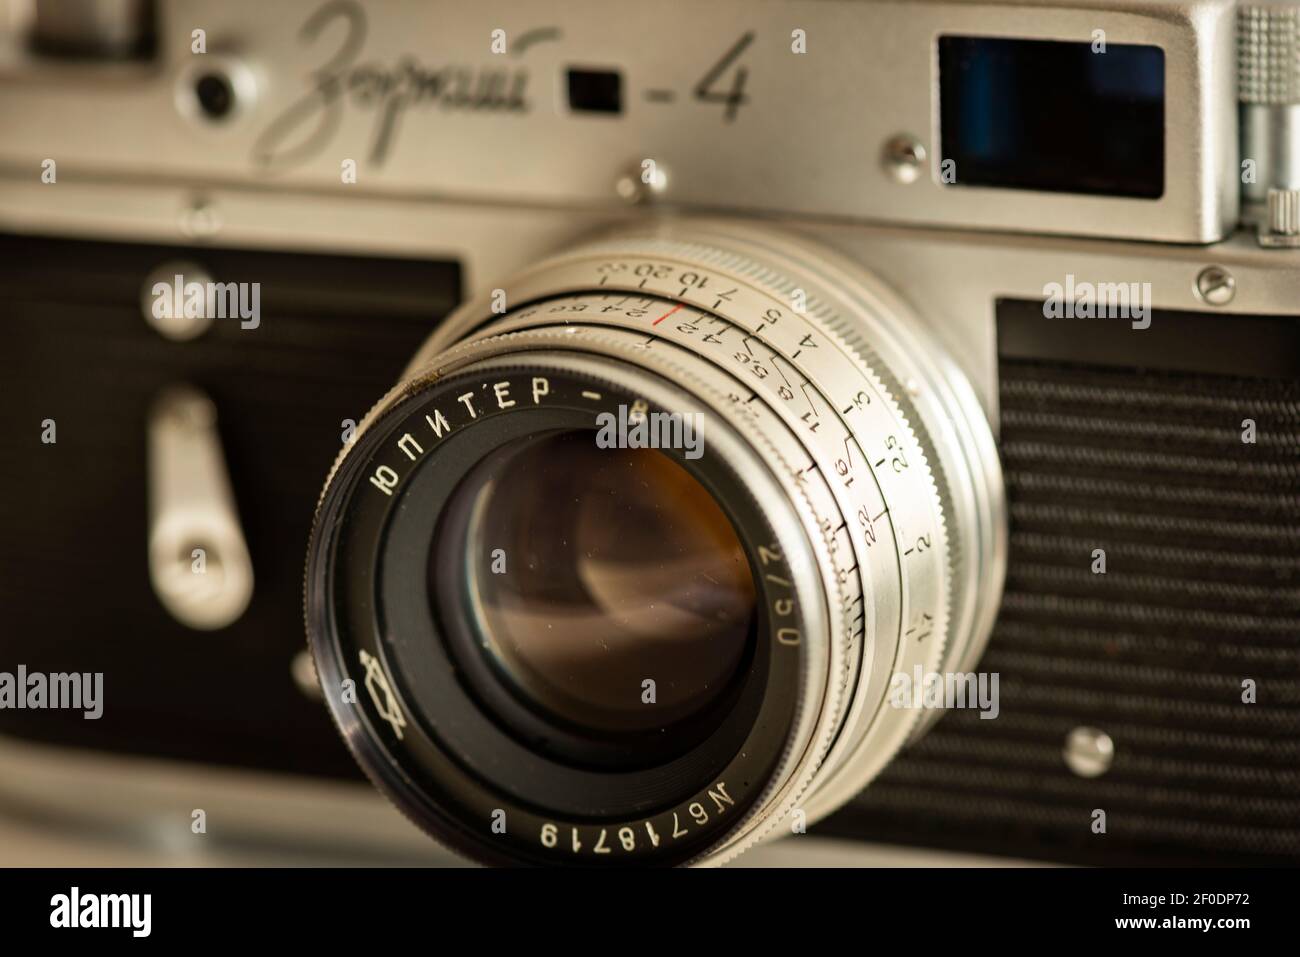 Jupiter 2/50 manual focus lens front view of Russian Zorki 4 old vintage silver manual film camera as classic retro photography concept. Stock Photo